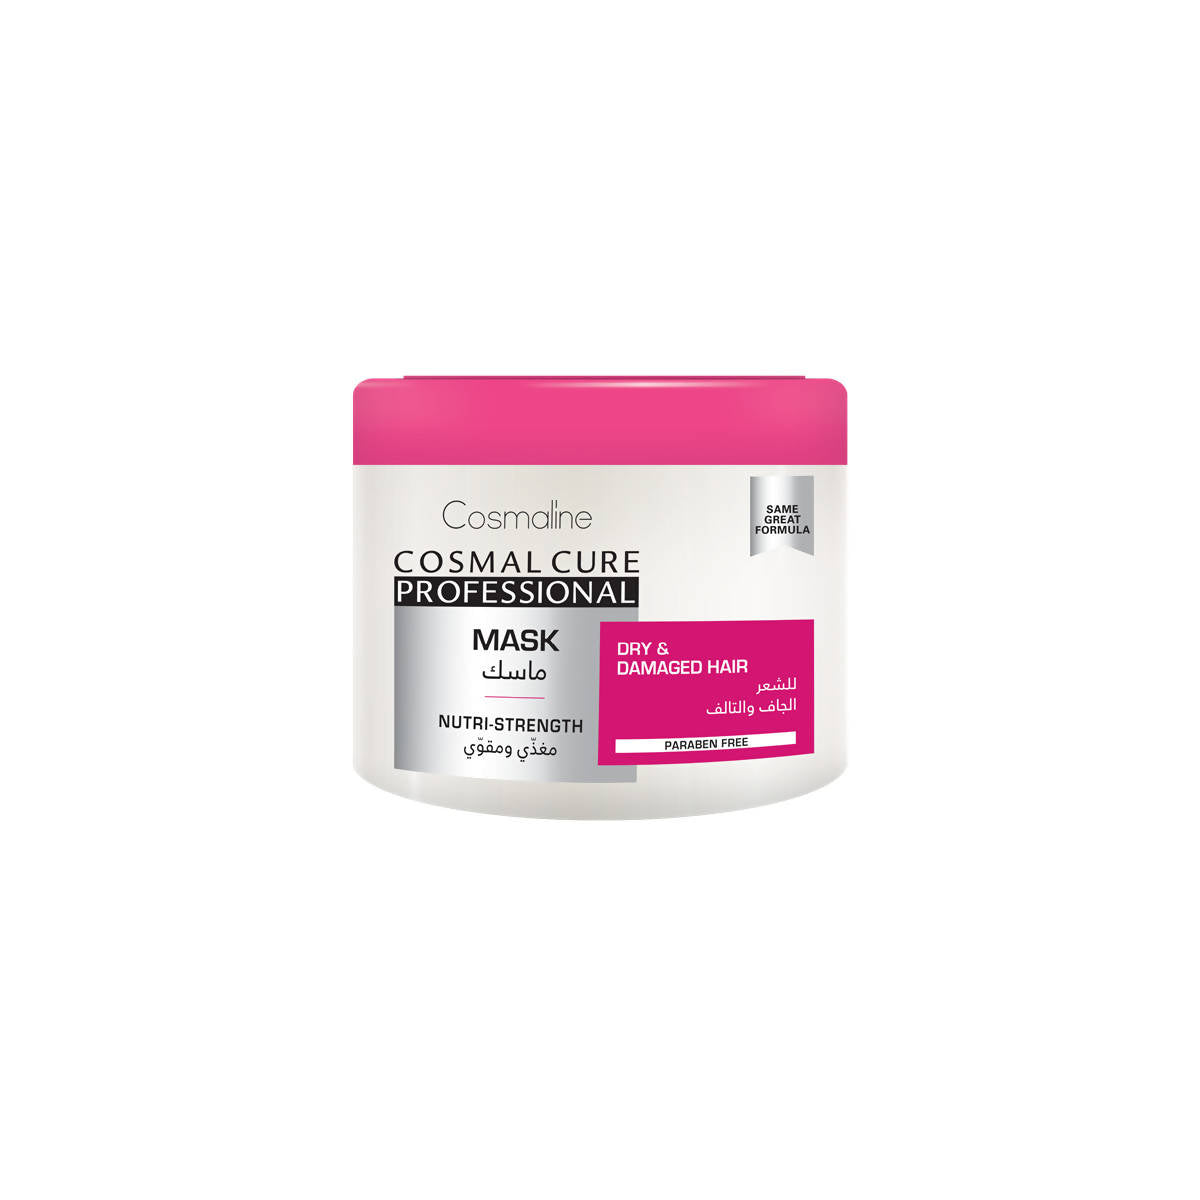 COSMAL CURE PROFESSIONAL MASK - NUTRI-STRENGTH - 450ML